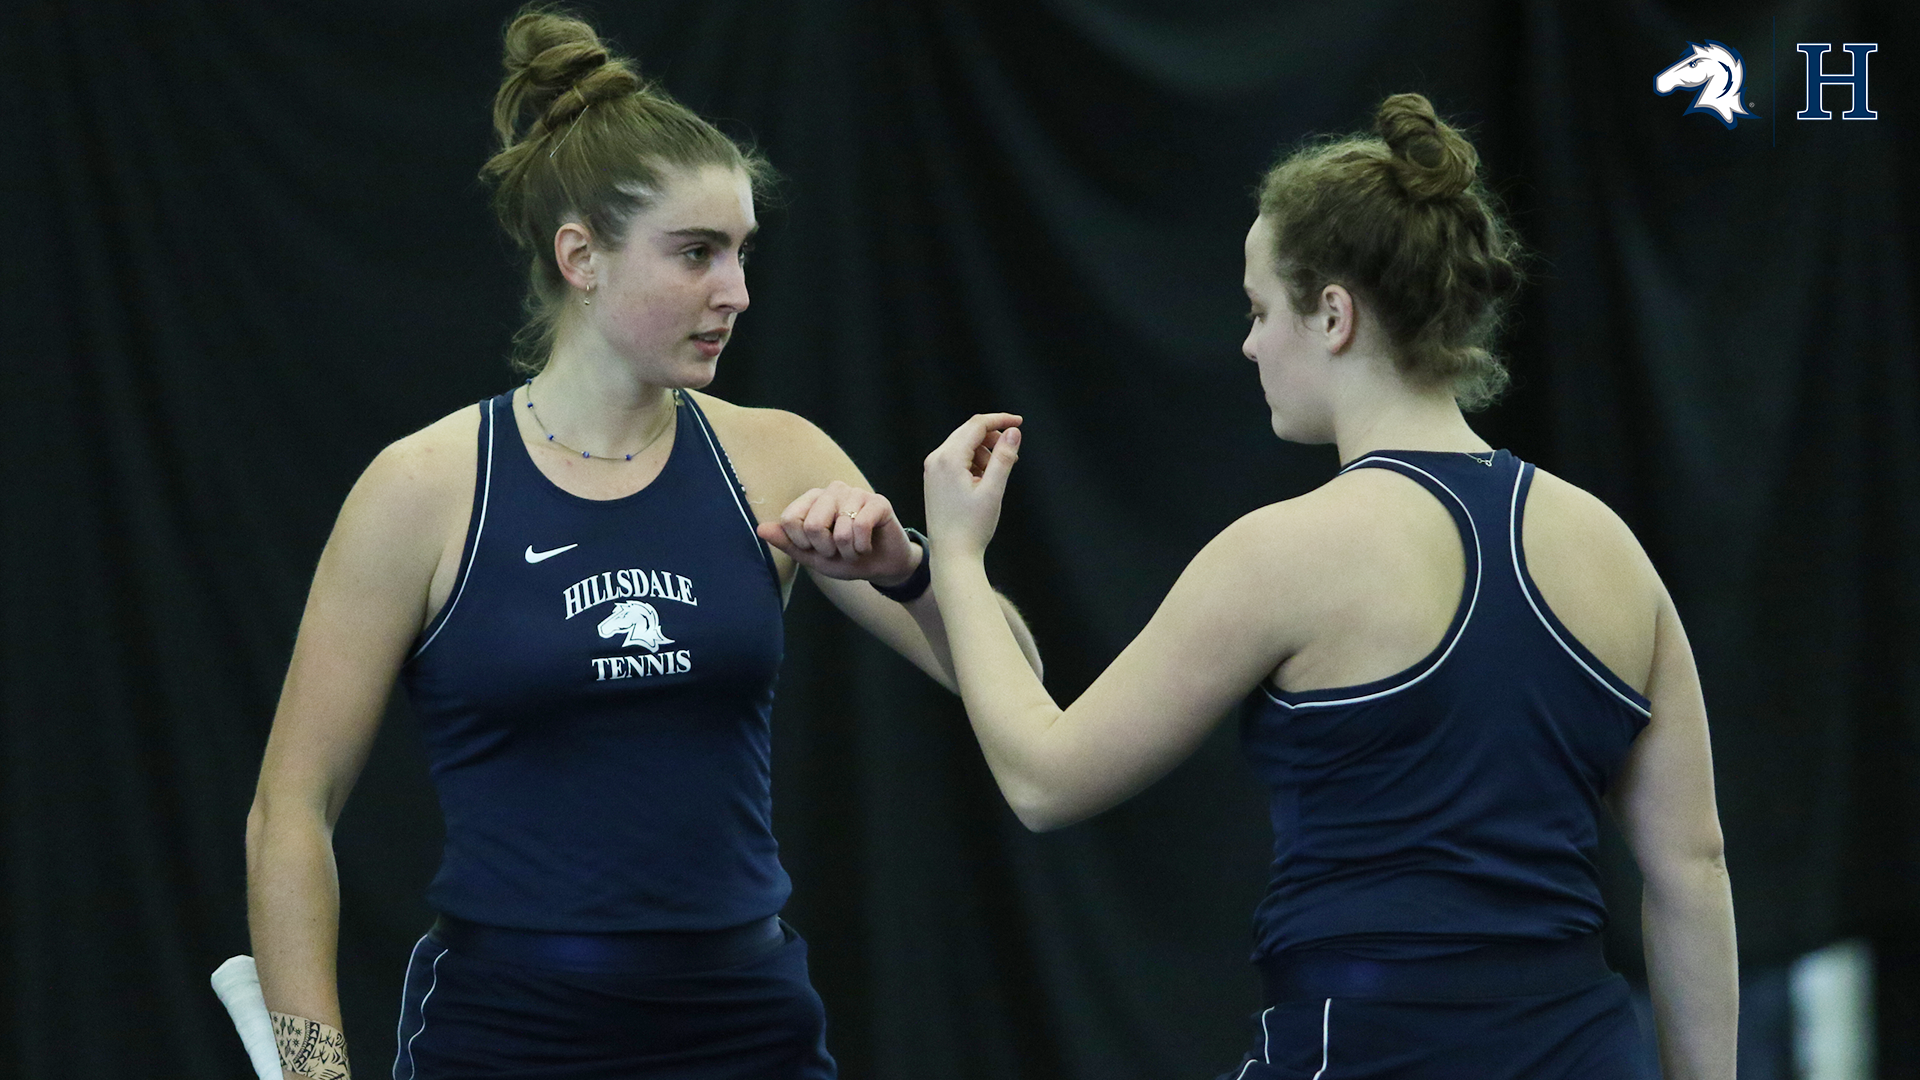 Charger women's tennis team drops close match to Walsh, 4-3, in home finale